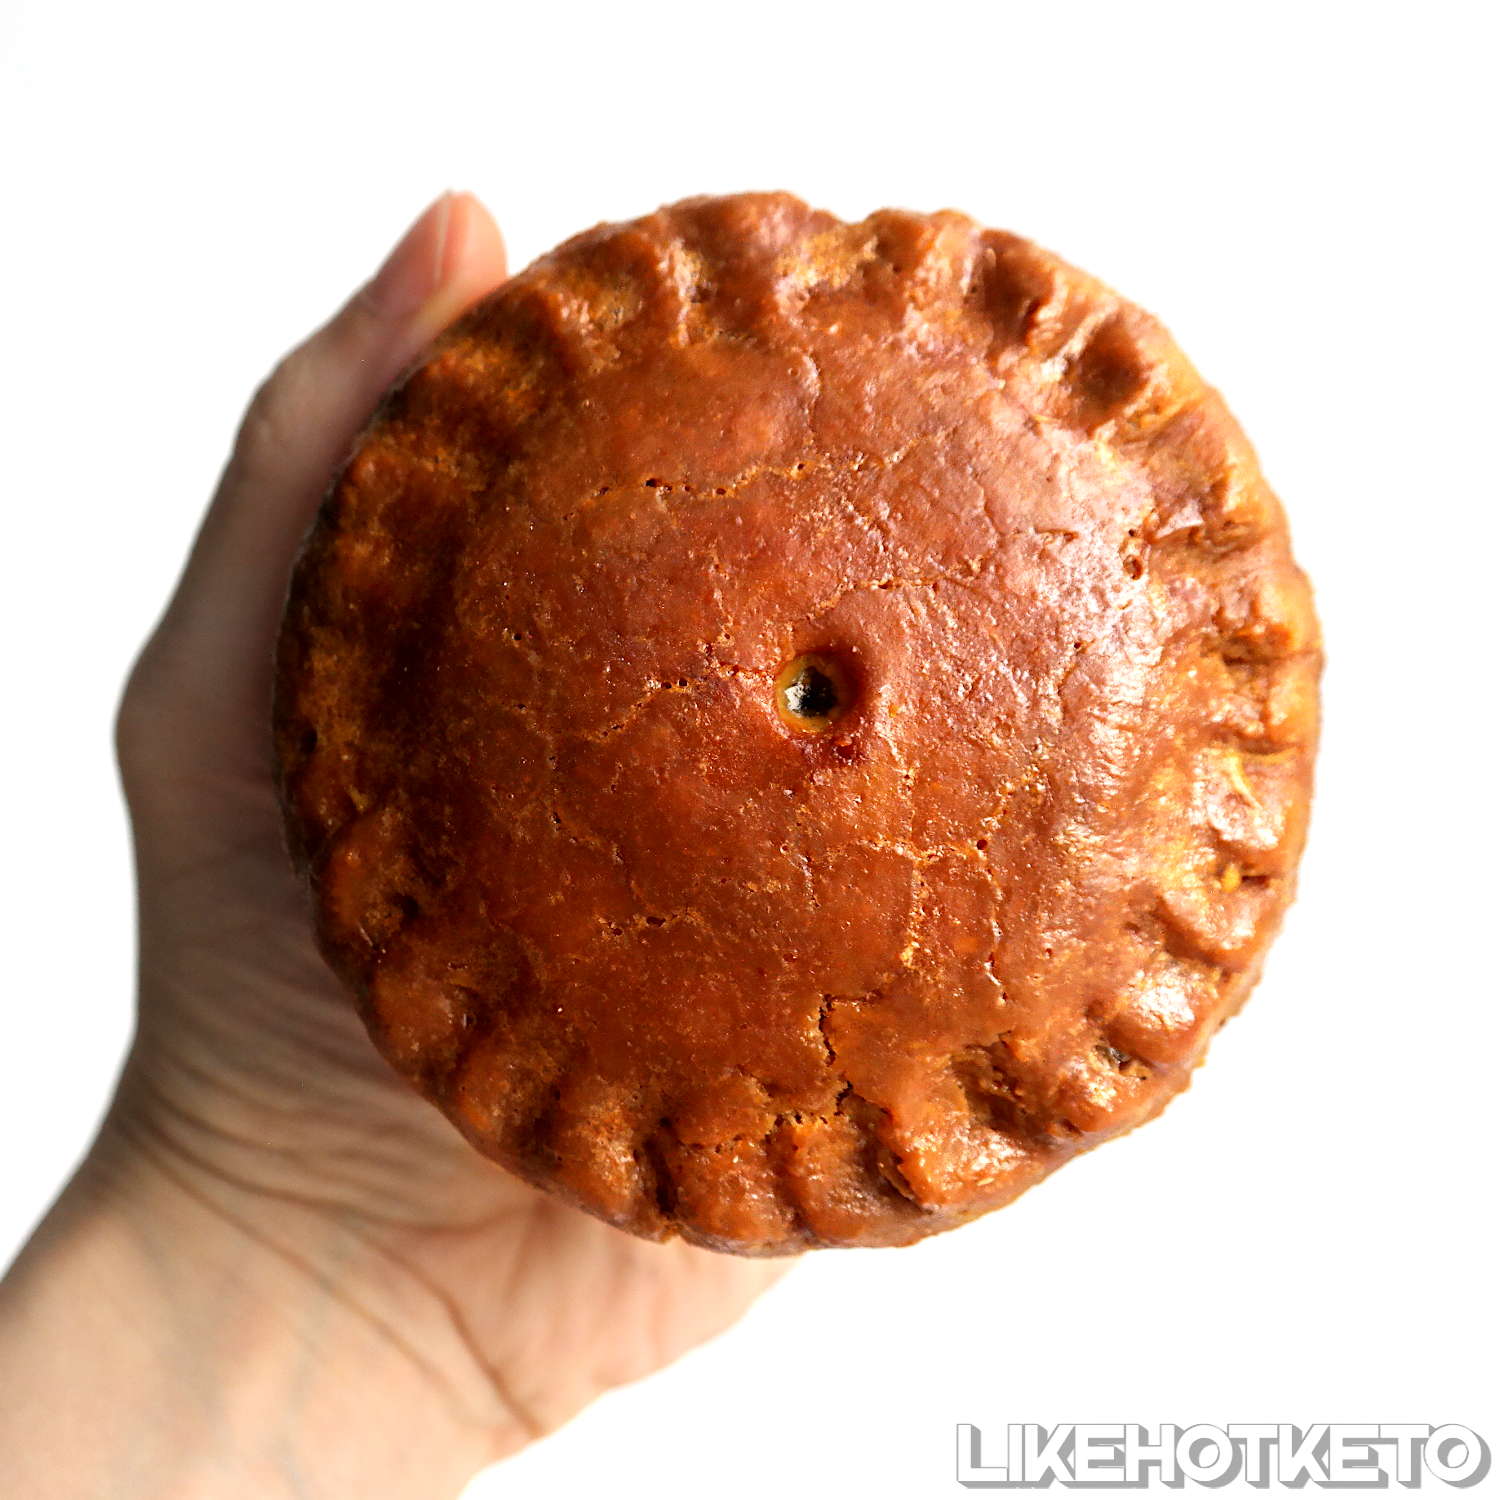 Keto and gluten-free traditional British pork pie with a golden crust.